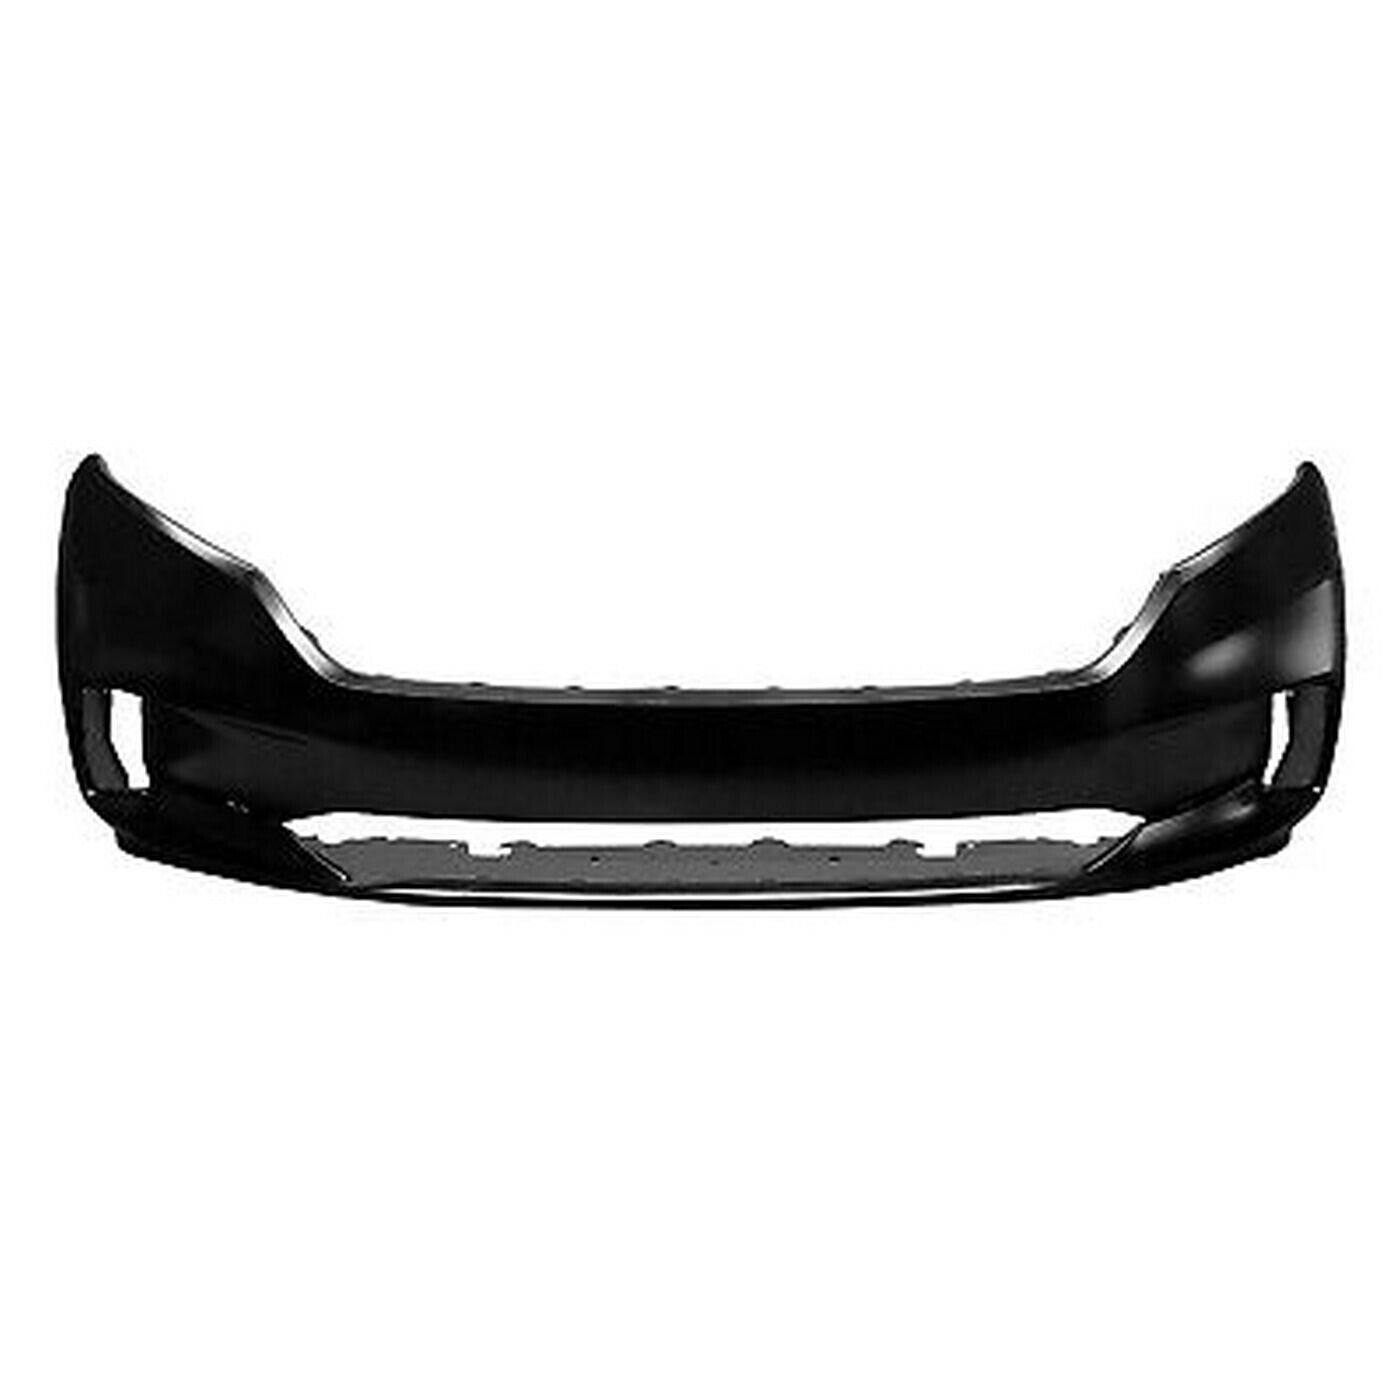 2021-2023 HONDA ODYSSEY; Front Bumper Cover; ELITE/TOURING w/Sensor Painted to Match